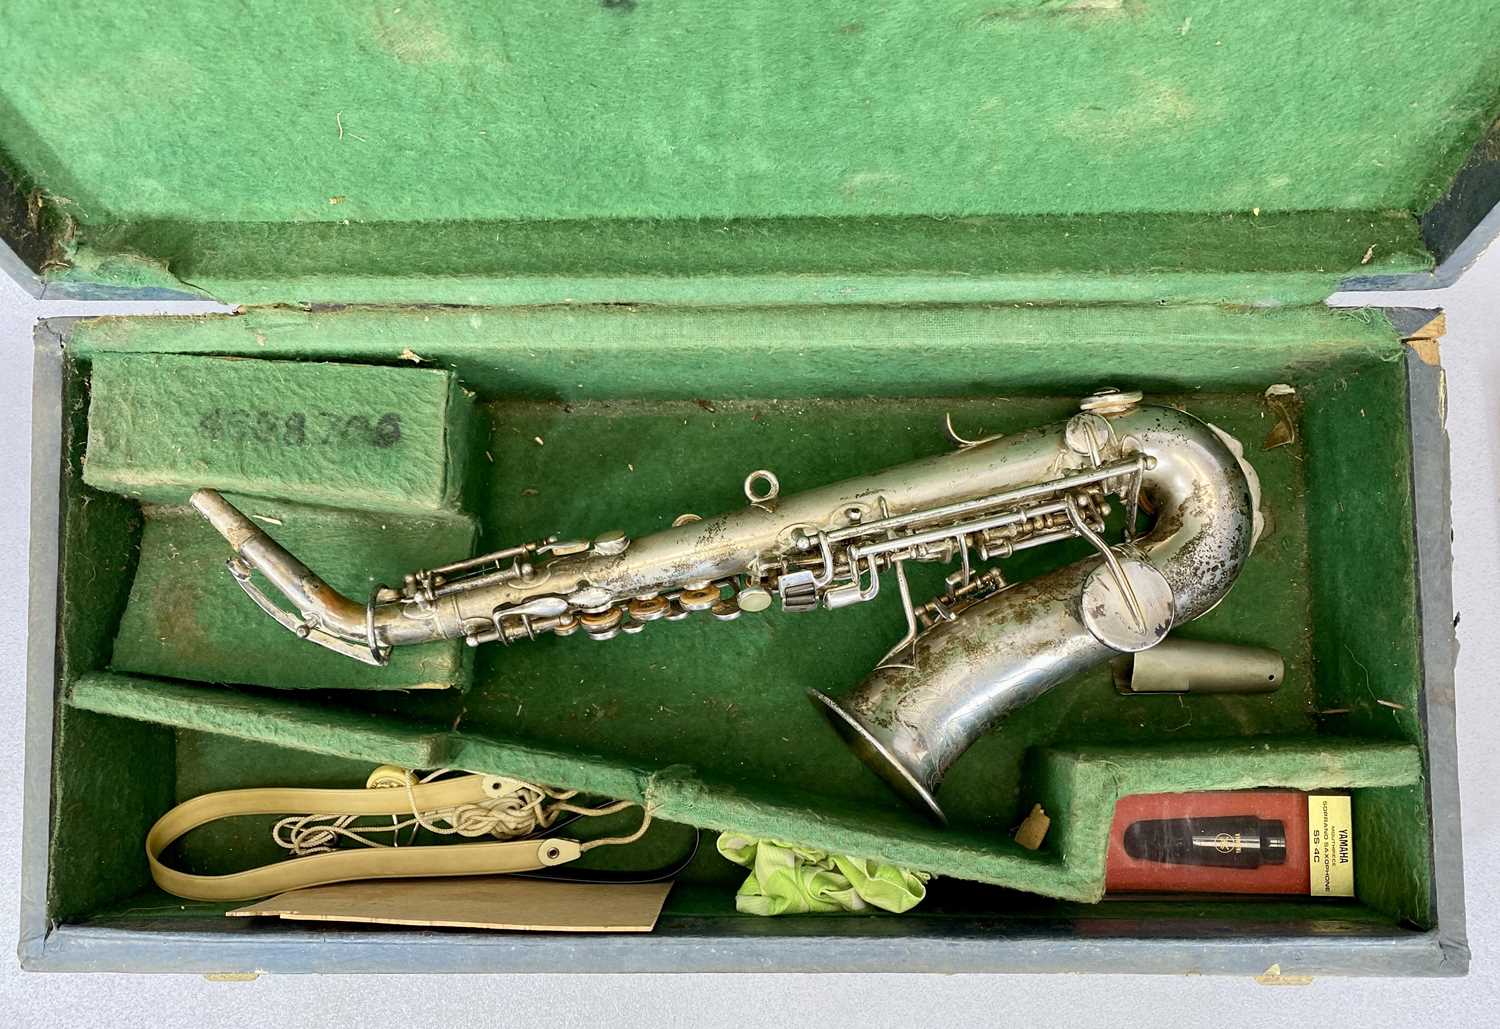 BUESCHER SILVER PLATED CURVED SOPRANO LOW PITCH SAXOPHONE, SERIAL NO. 103768, with case - Image 4 of 5